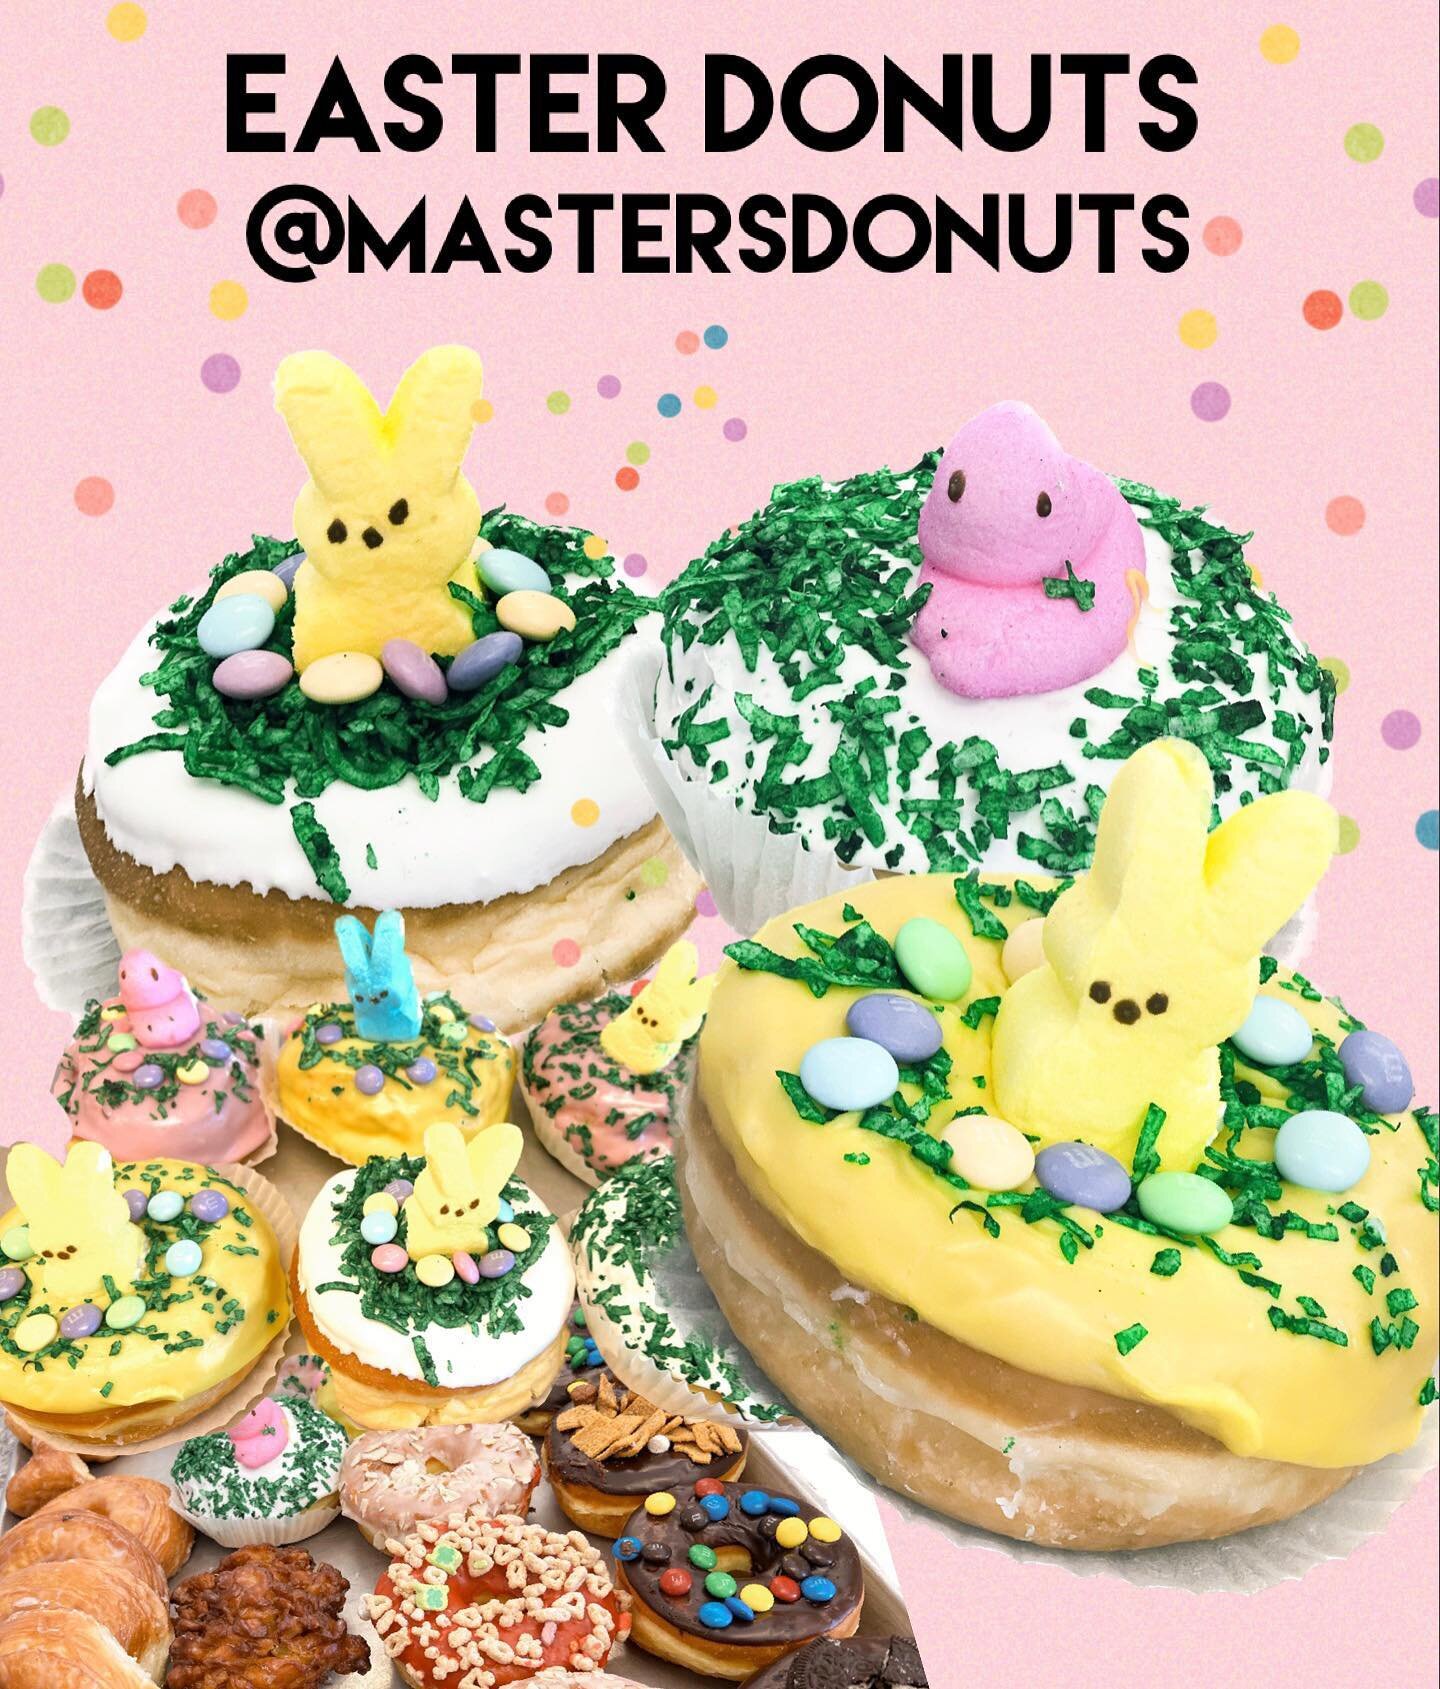 We will be selling Easter Donuts everyday from today through Easter Sunday! You can also come in to place an order if you want a specific amount or color. 🥳🥳 🐣🐣🐣💕💕💕